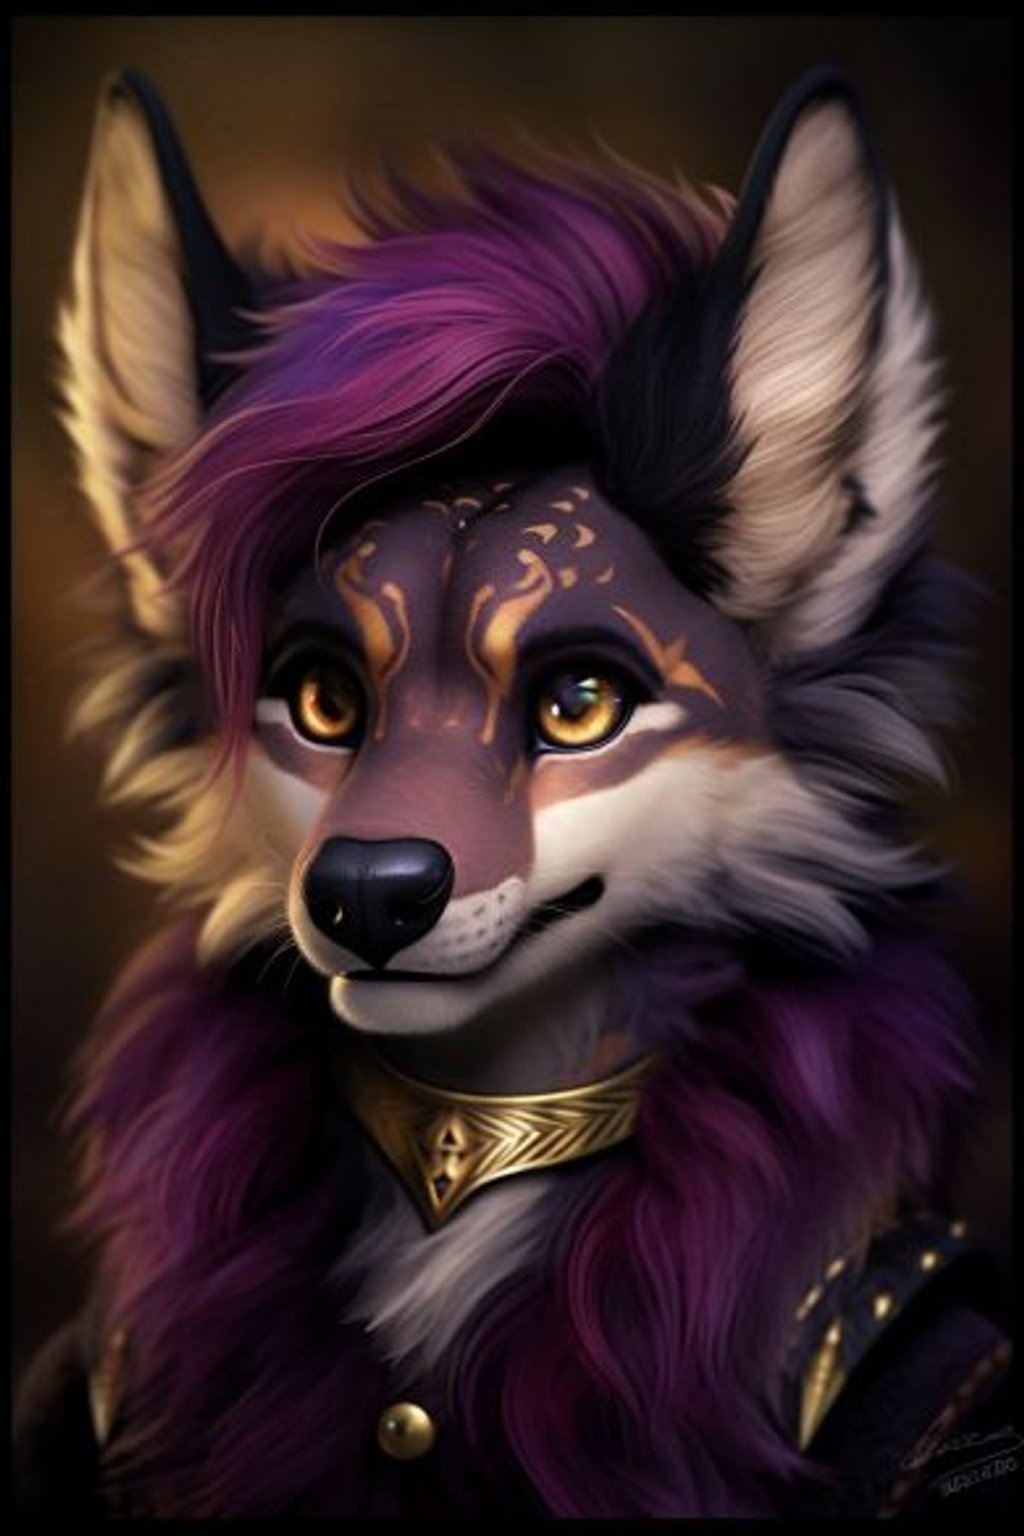 Prompt: a photorealistic image of a furry anthropomorphic jackal with Crimson Red Fur, Brown Stomach, Black Arms, Gold Eye Makeup, Green Eyes and long Black Ears. he wears a Spiked Dog Collar and has purple hair tuft. The image is realistic and the scene feels dramatic, giving off a sense of power and strength, but also warmth and comfort. A very detailed and unique character design image overall. --ar 2:3 --q 2 --upbeta --niji 5